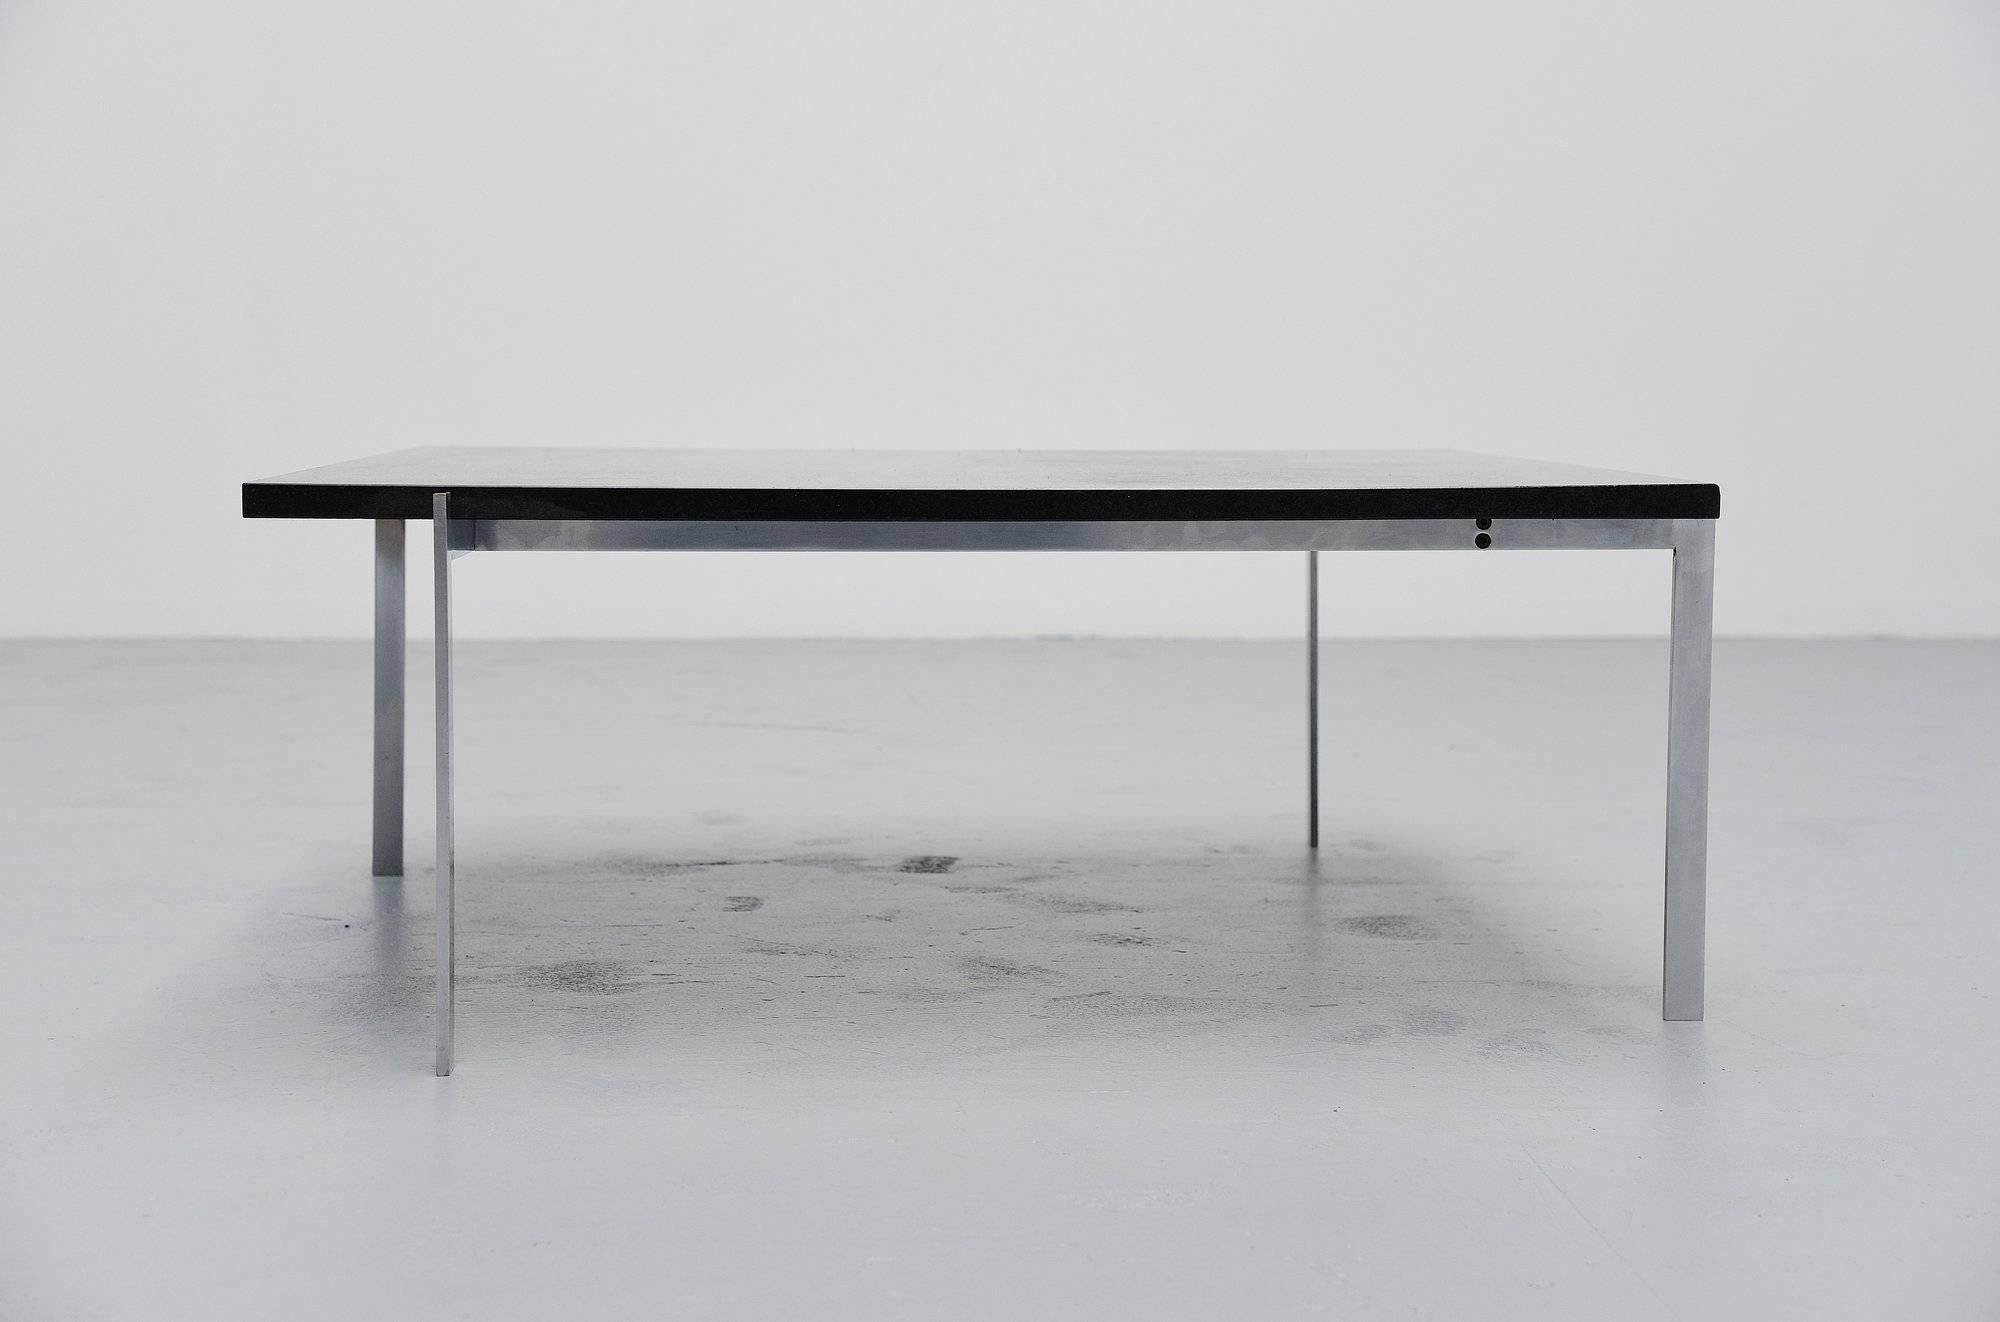 Nice large square coffee table in the style of Poul Kjaerholm, Denmark, 1970. This table has a brushed matt chrome plated steel frame, similar to the PK61 from Poul Kjaerholm. But this table is 90x90 cm where the original one is 80x80 cm. The table